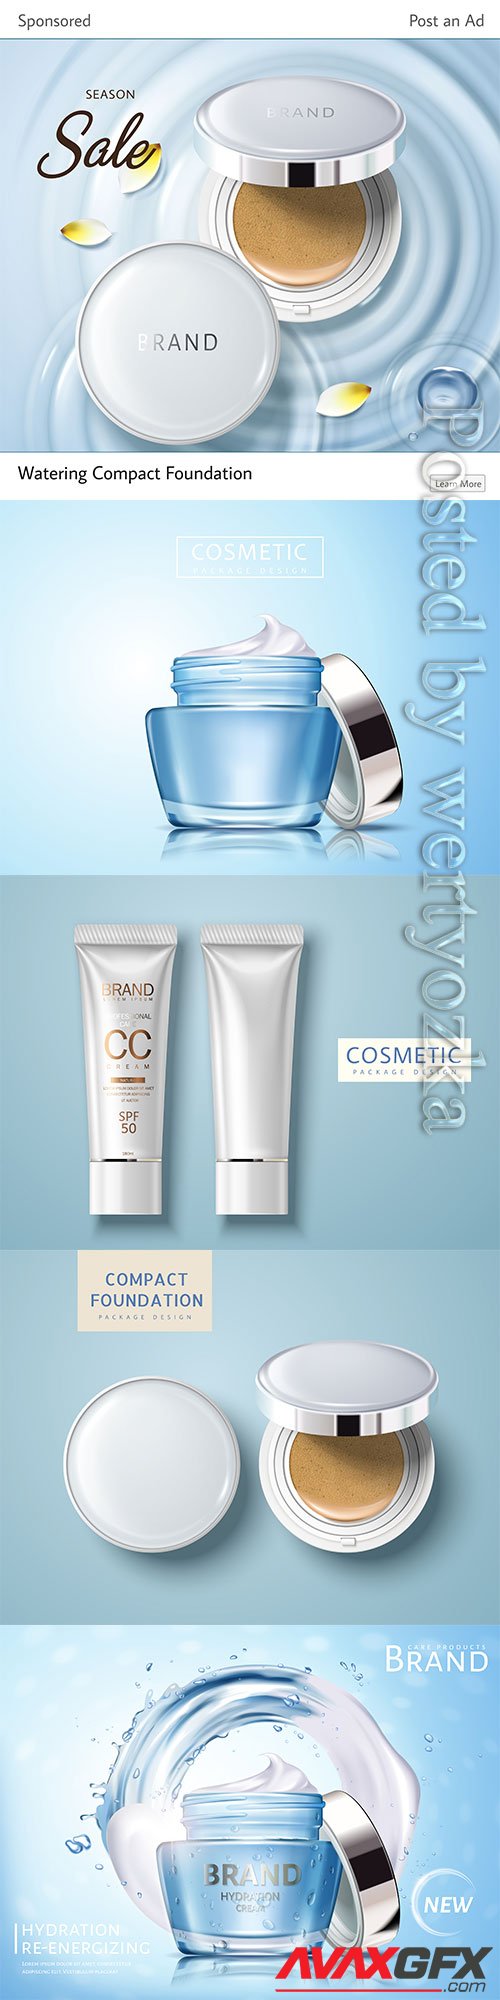 Bottle package skin care cream, beauty cosmetic poster